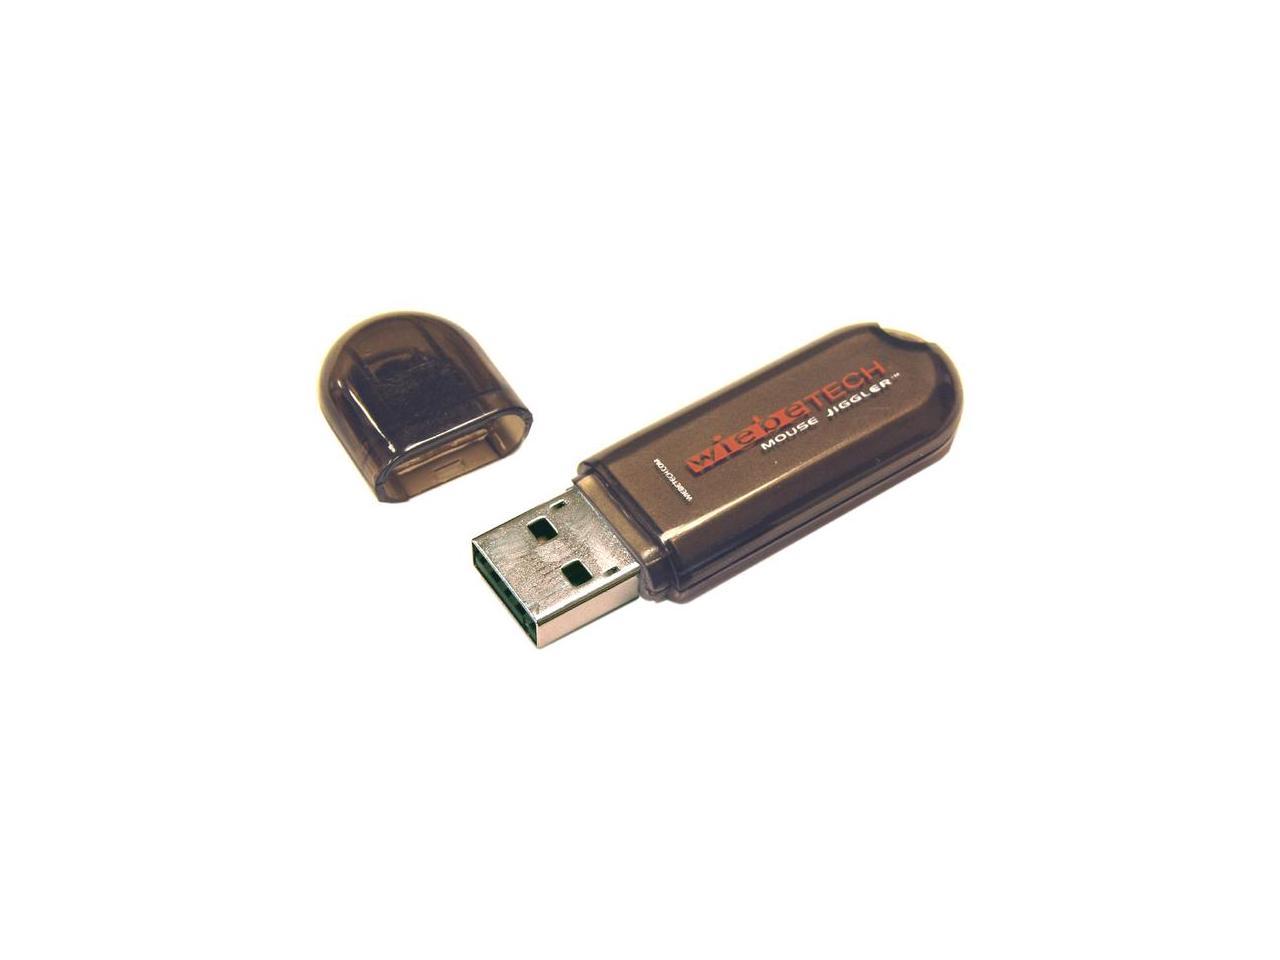 Mjs gadgets usb devices driver download for windows 8